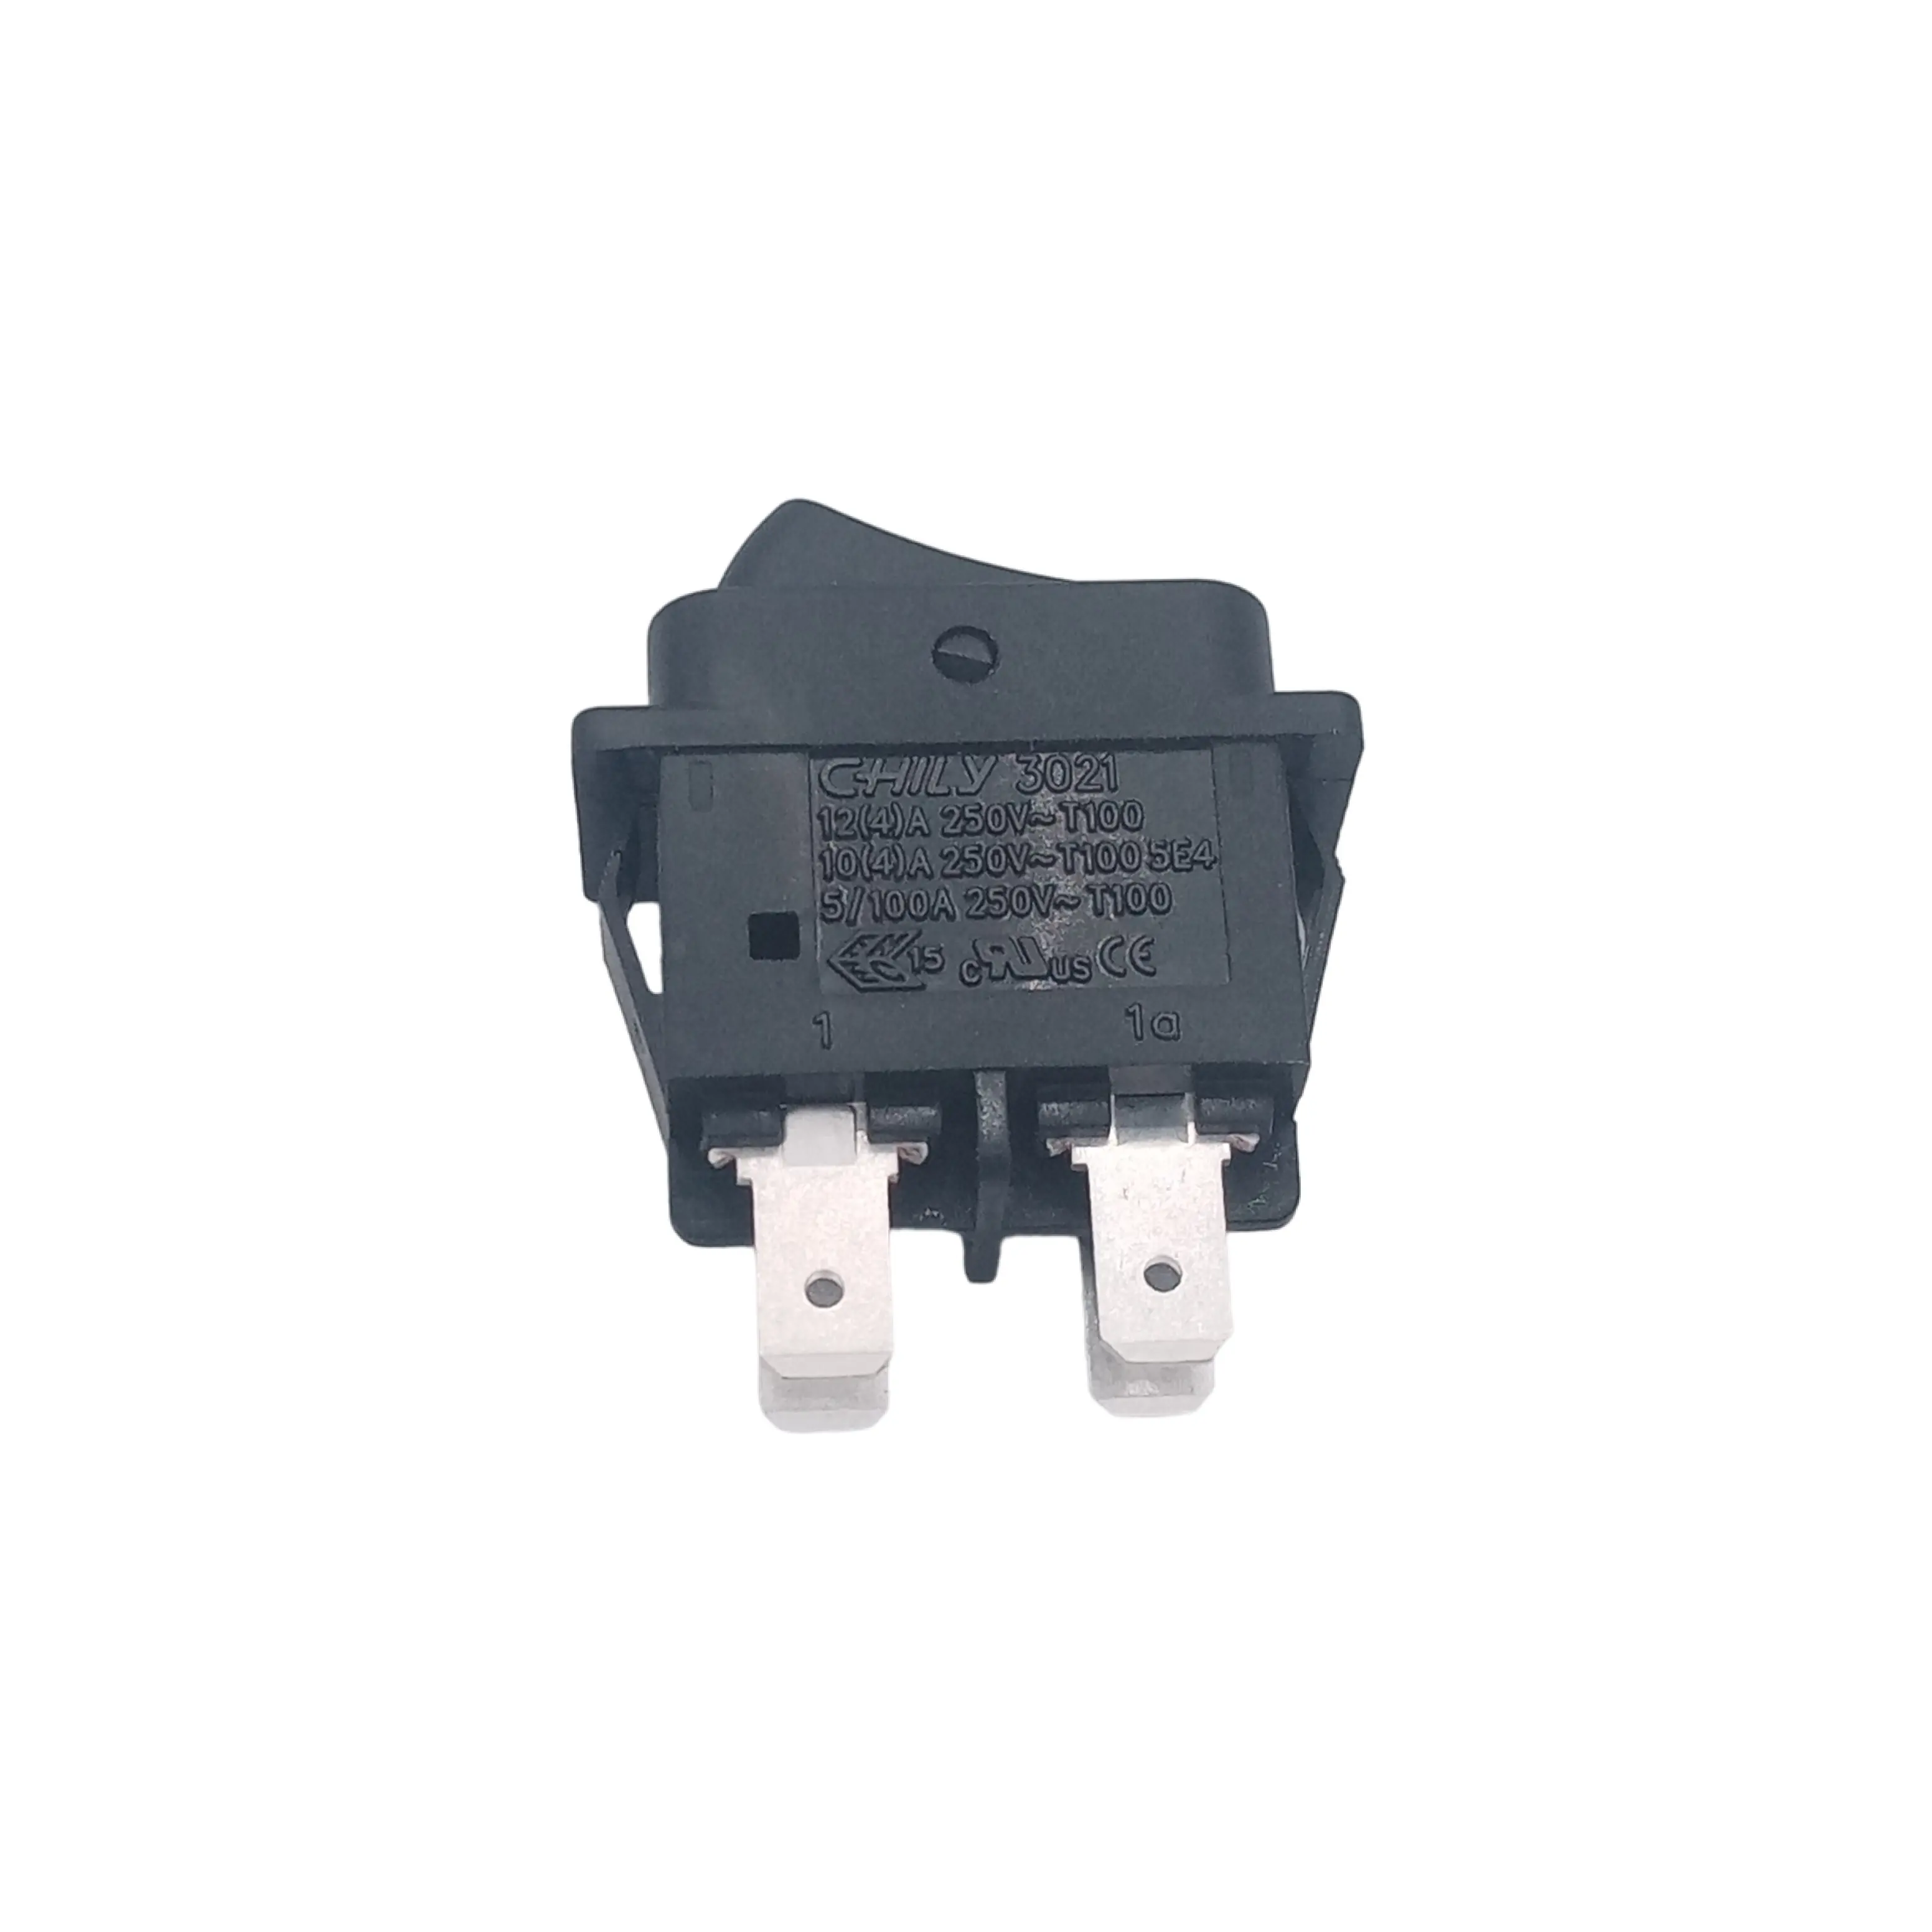 Manufacturers 16A Switch,on-off Switch, German Marquardt To Replace high current DPST rocker Switch